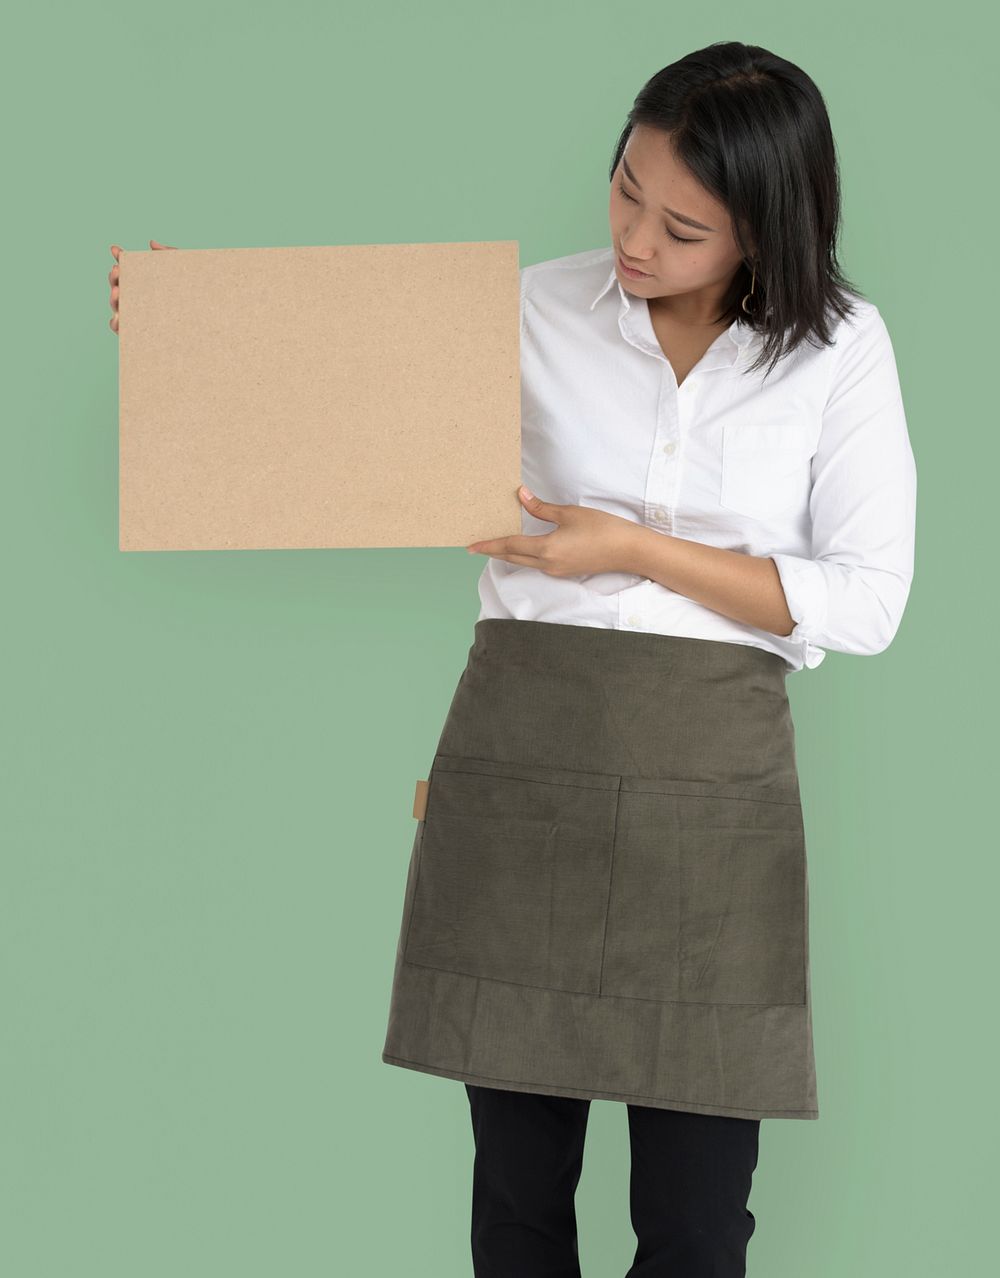 Woman Holding Cork Board Copy Space Concept